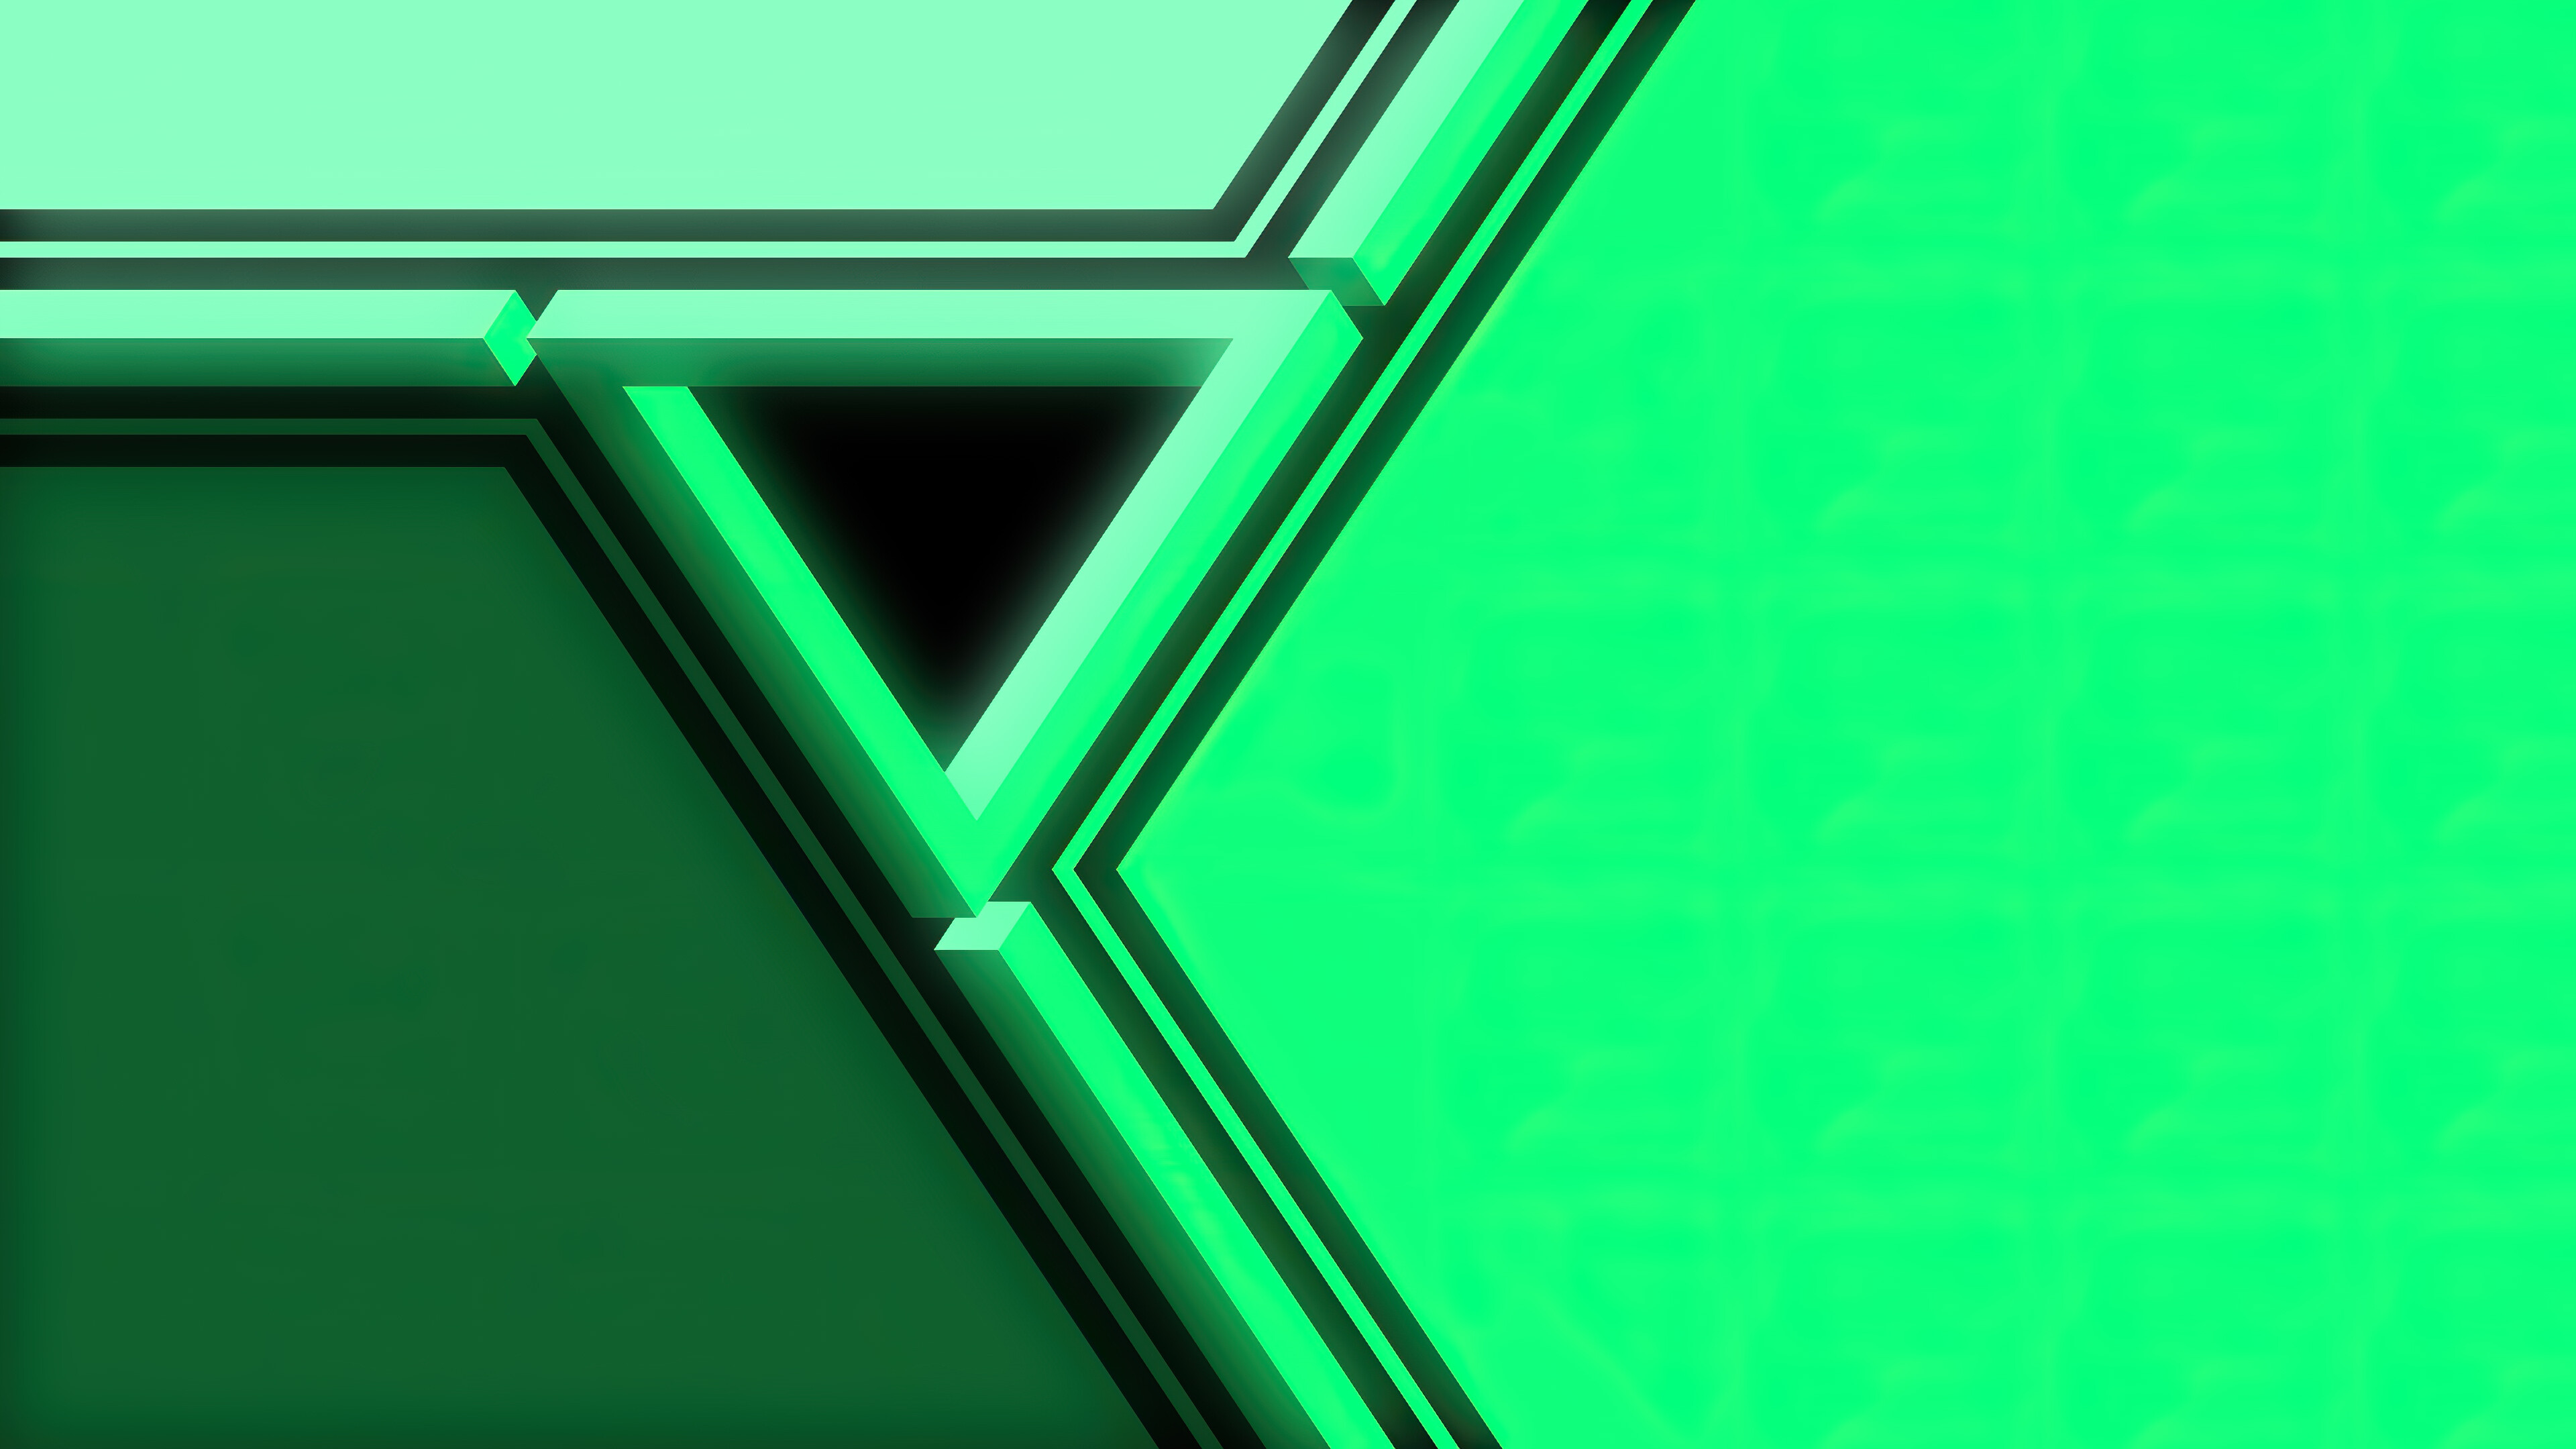 Triangle: Penrose triangle, Abstract, Parallel lines. 3840x2160 4K Wallpaper.